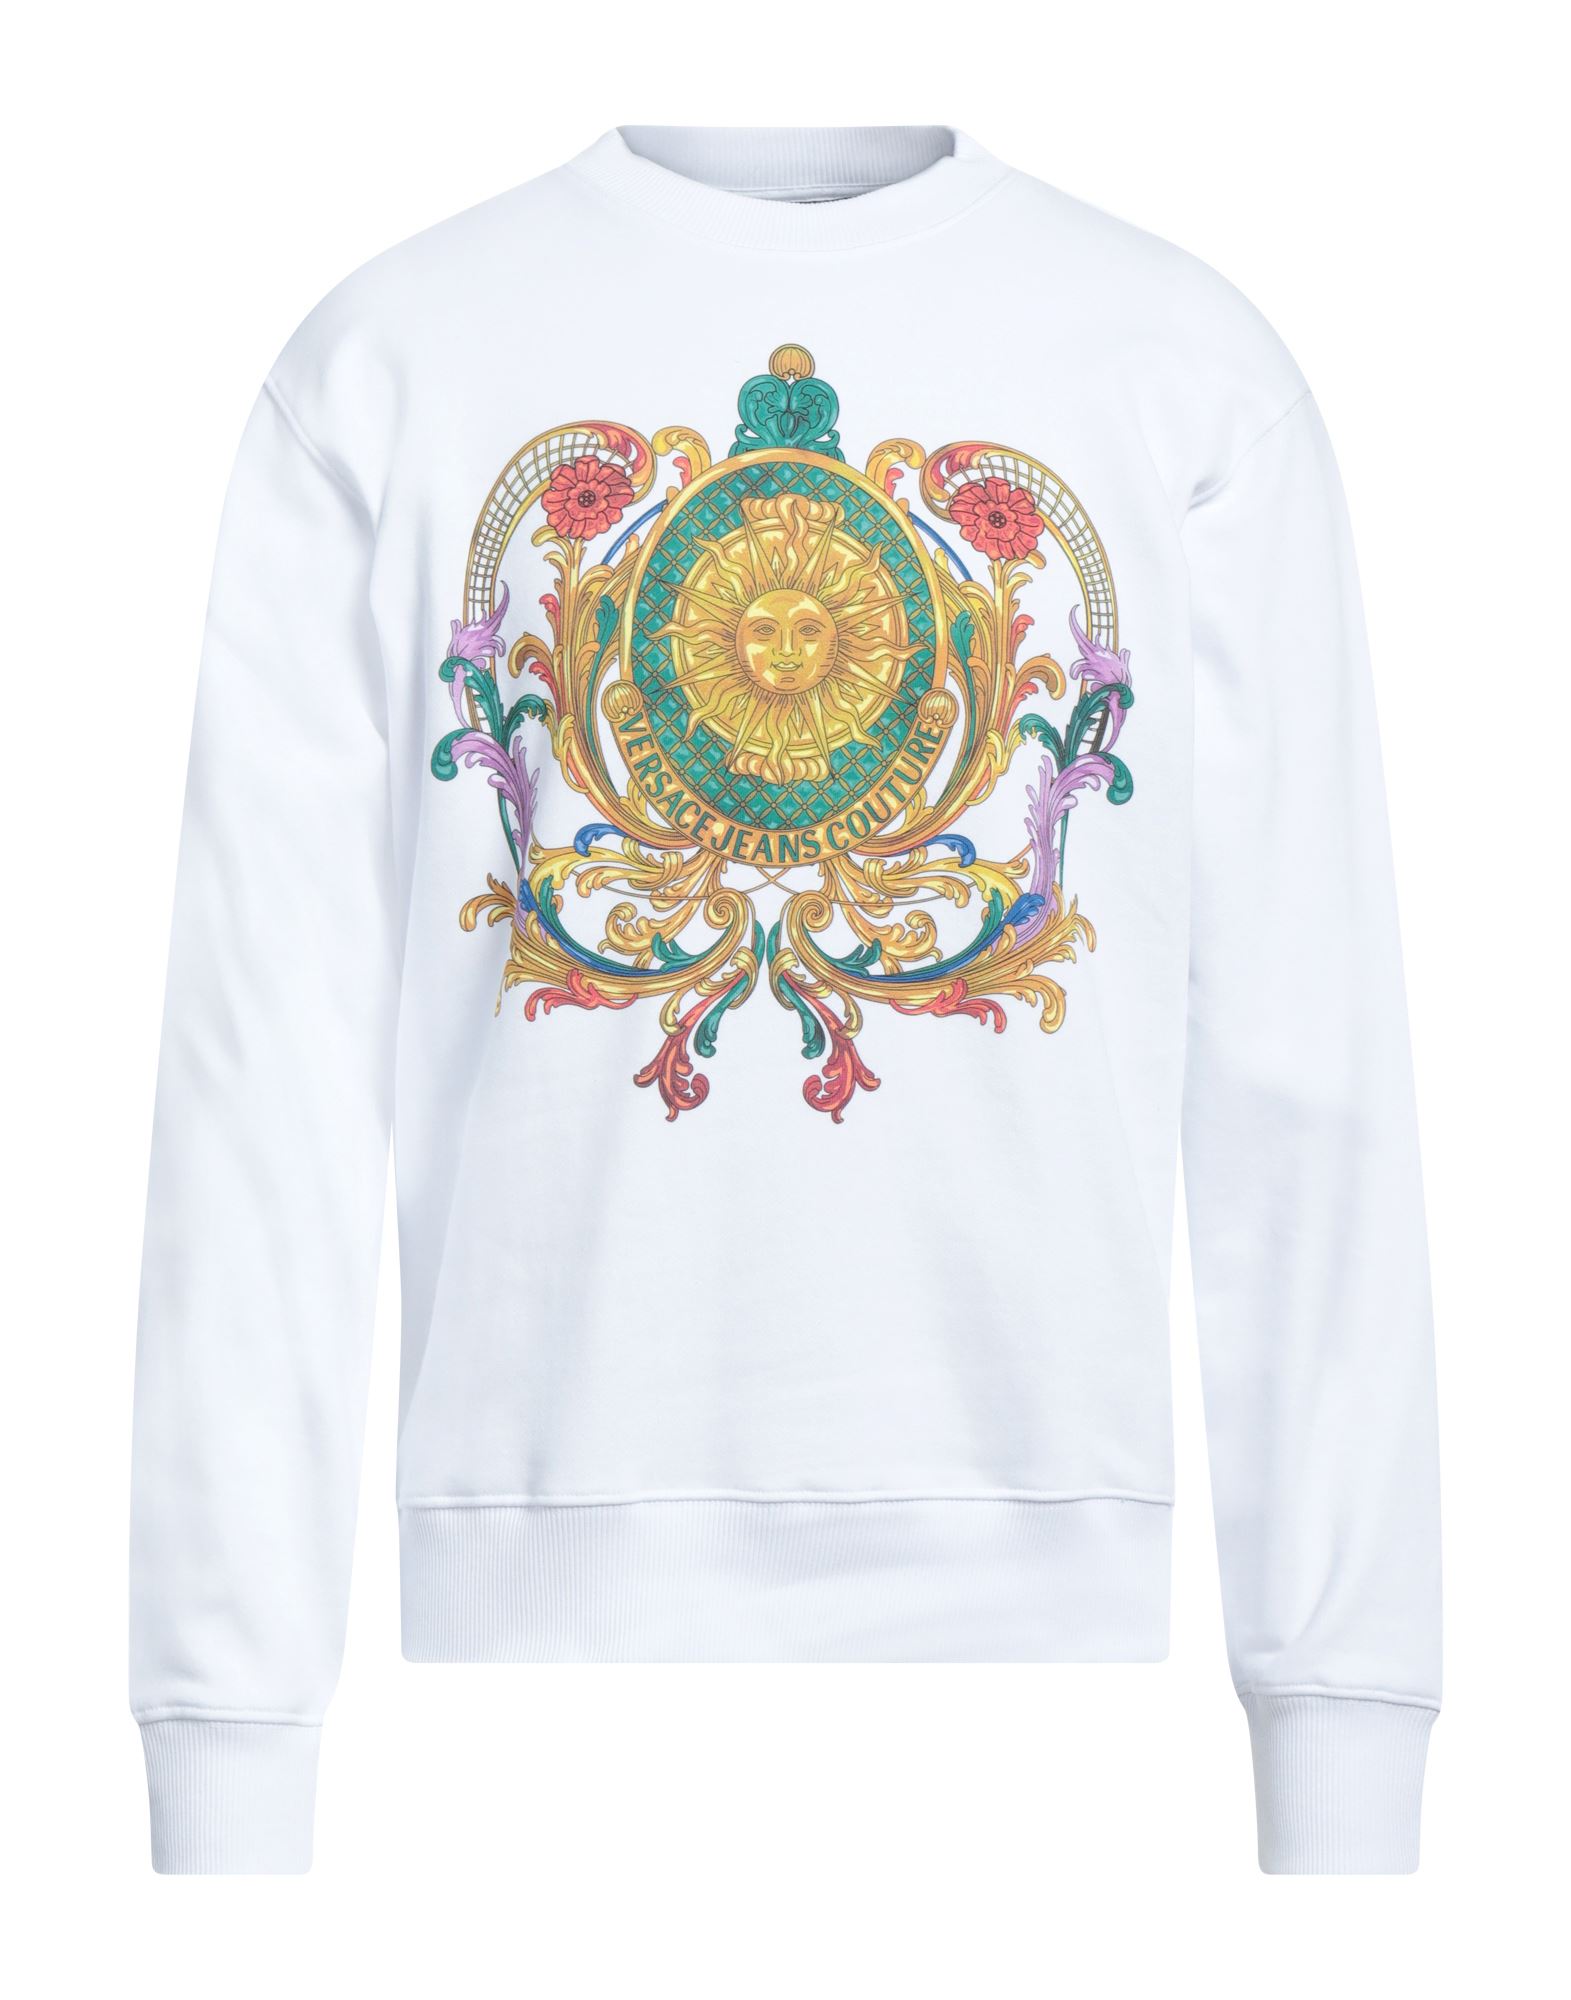 Versace Jeans Couture Sweatshirts In White